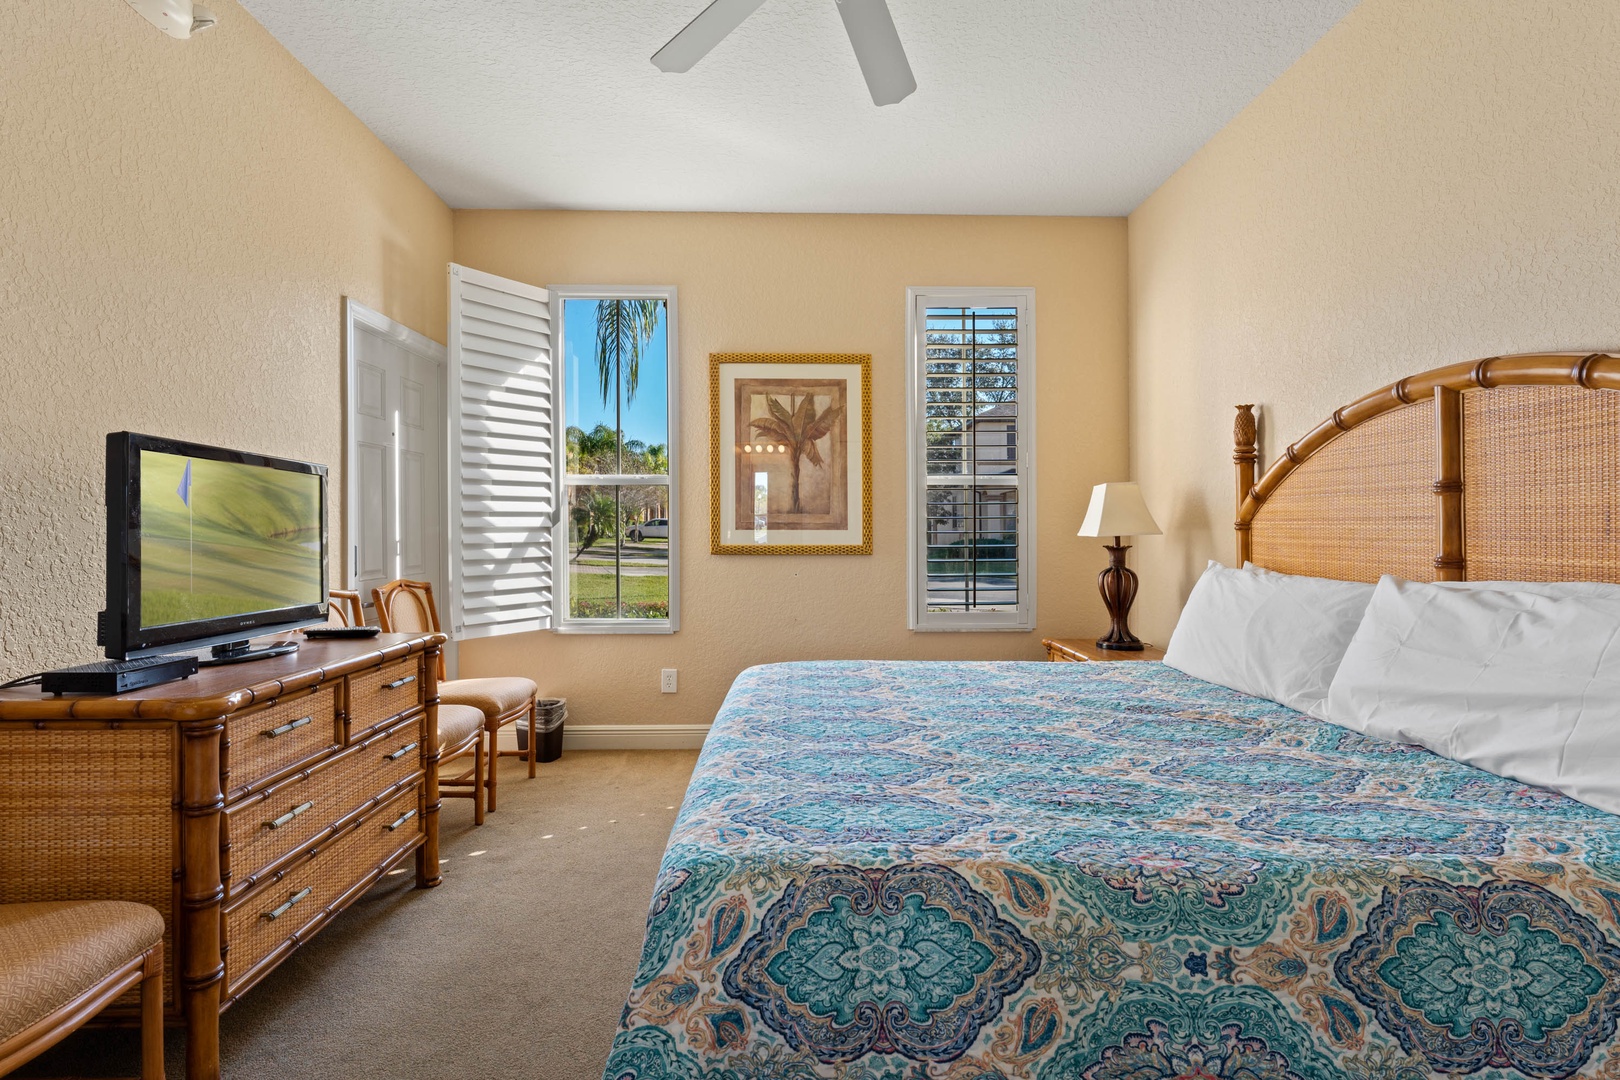 This 1st floor king suite offers a private ensuite, TV, & ceiling fan